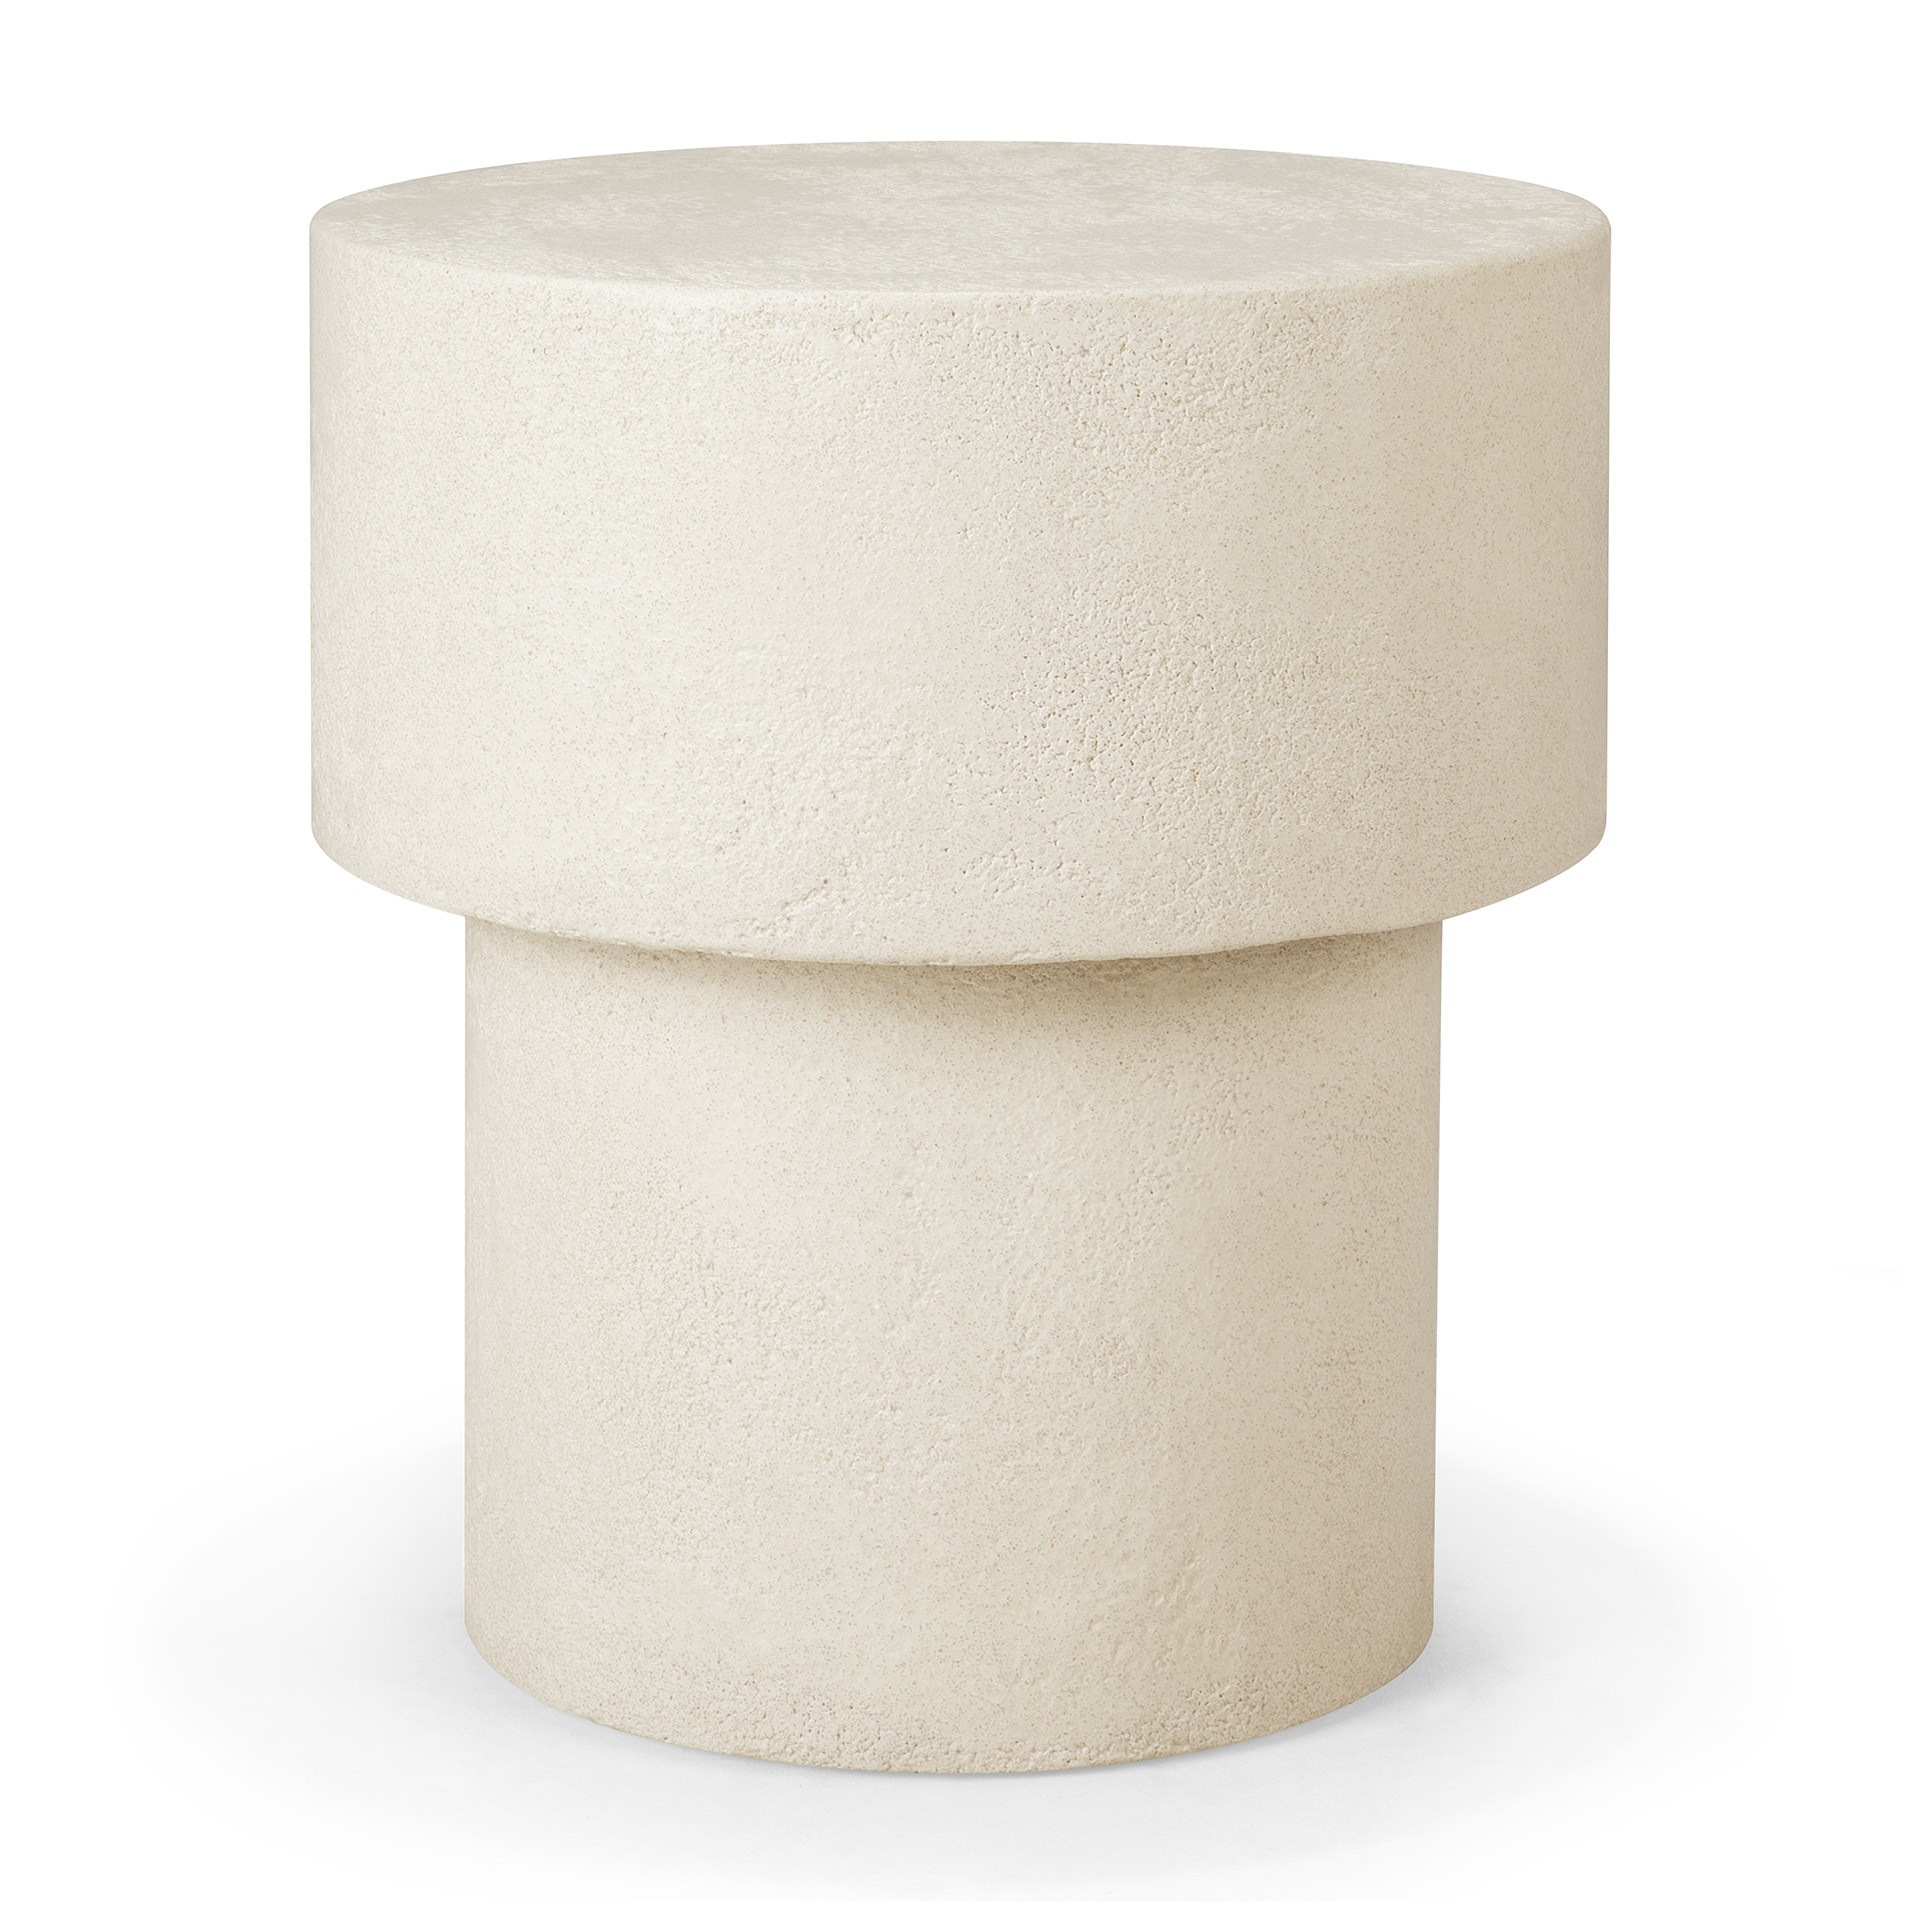 Elements_side_table_stool_microcement_off_white_mushroom_Ethnicraft